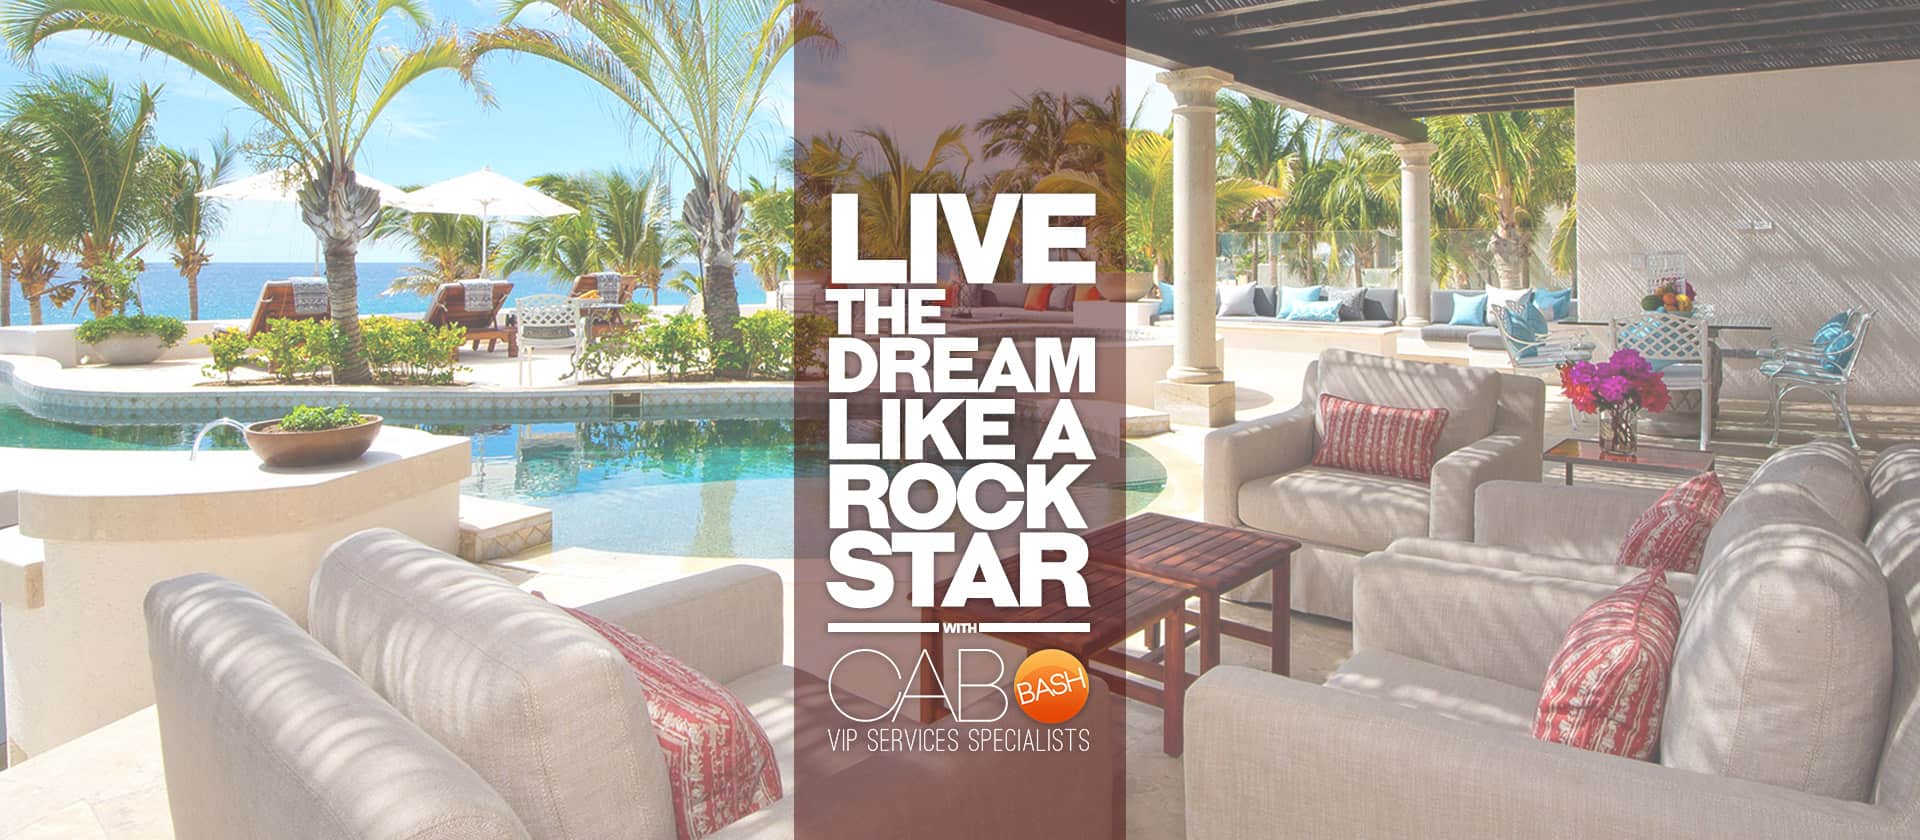 enjoy cabo at 100% with cabobash vip services